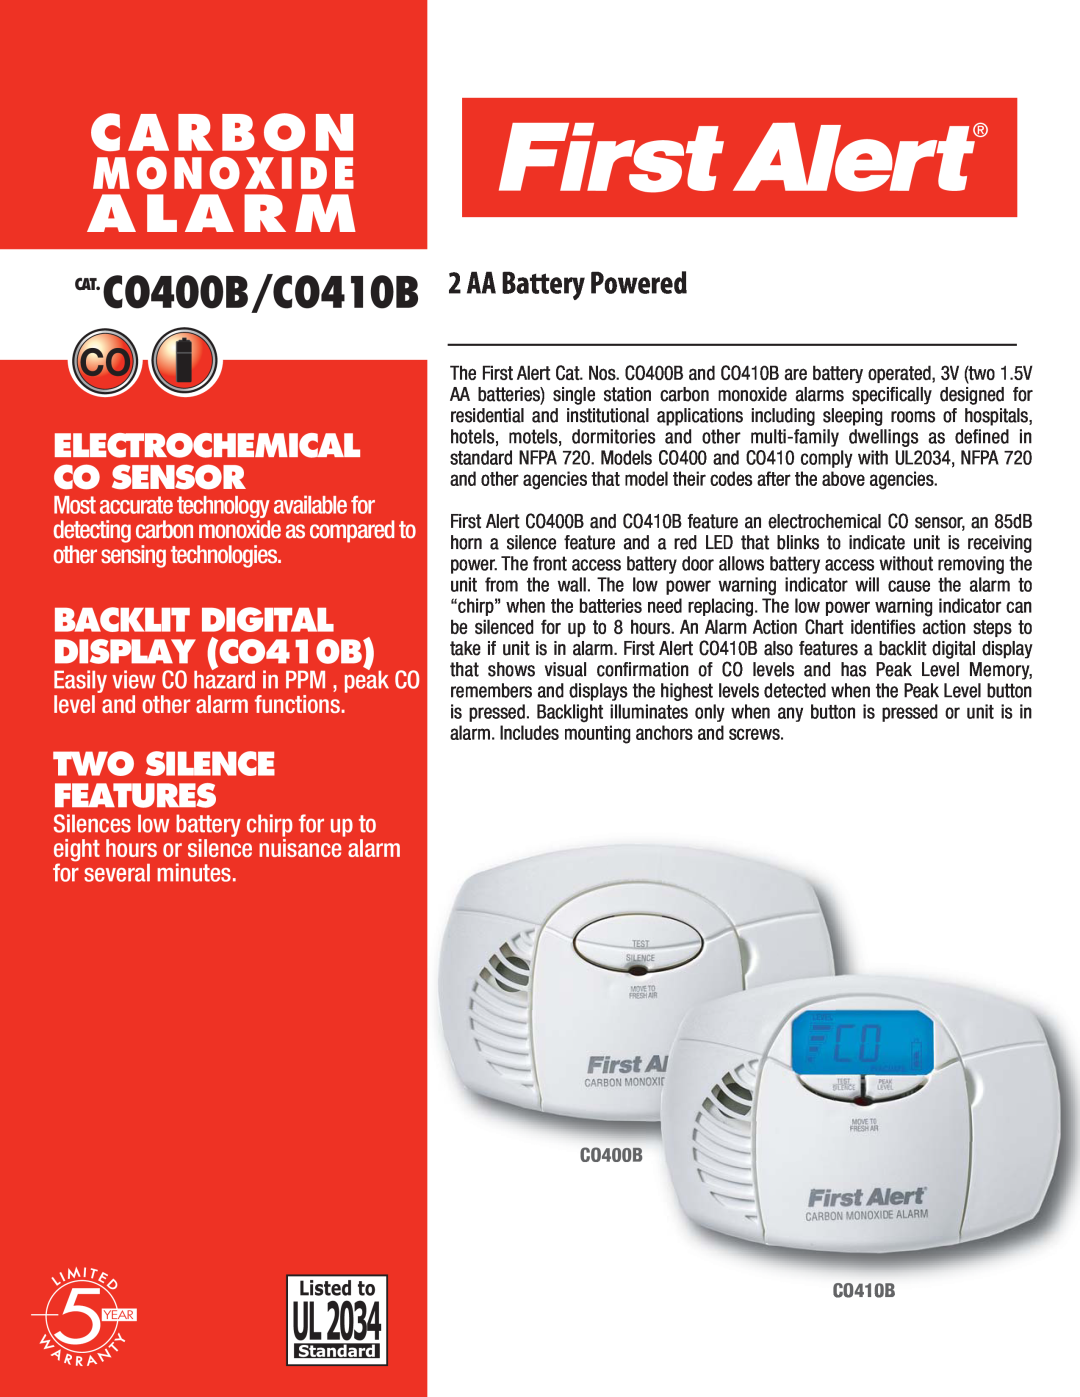 First Alert C0410B manual Alarm, Carbon, Monoxide, CAT.CO400B/CO410B, BACKLIT DIGITAL DISPLAY CO410B, Two Silence Features 